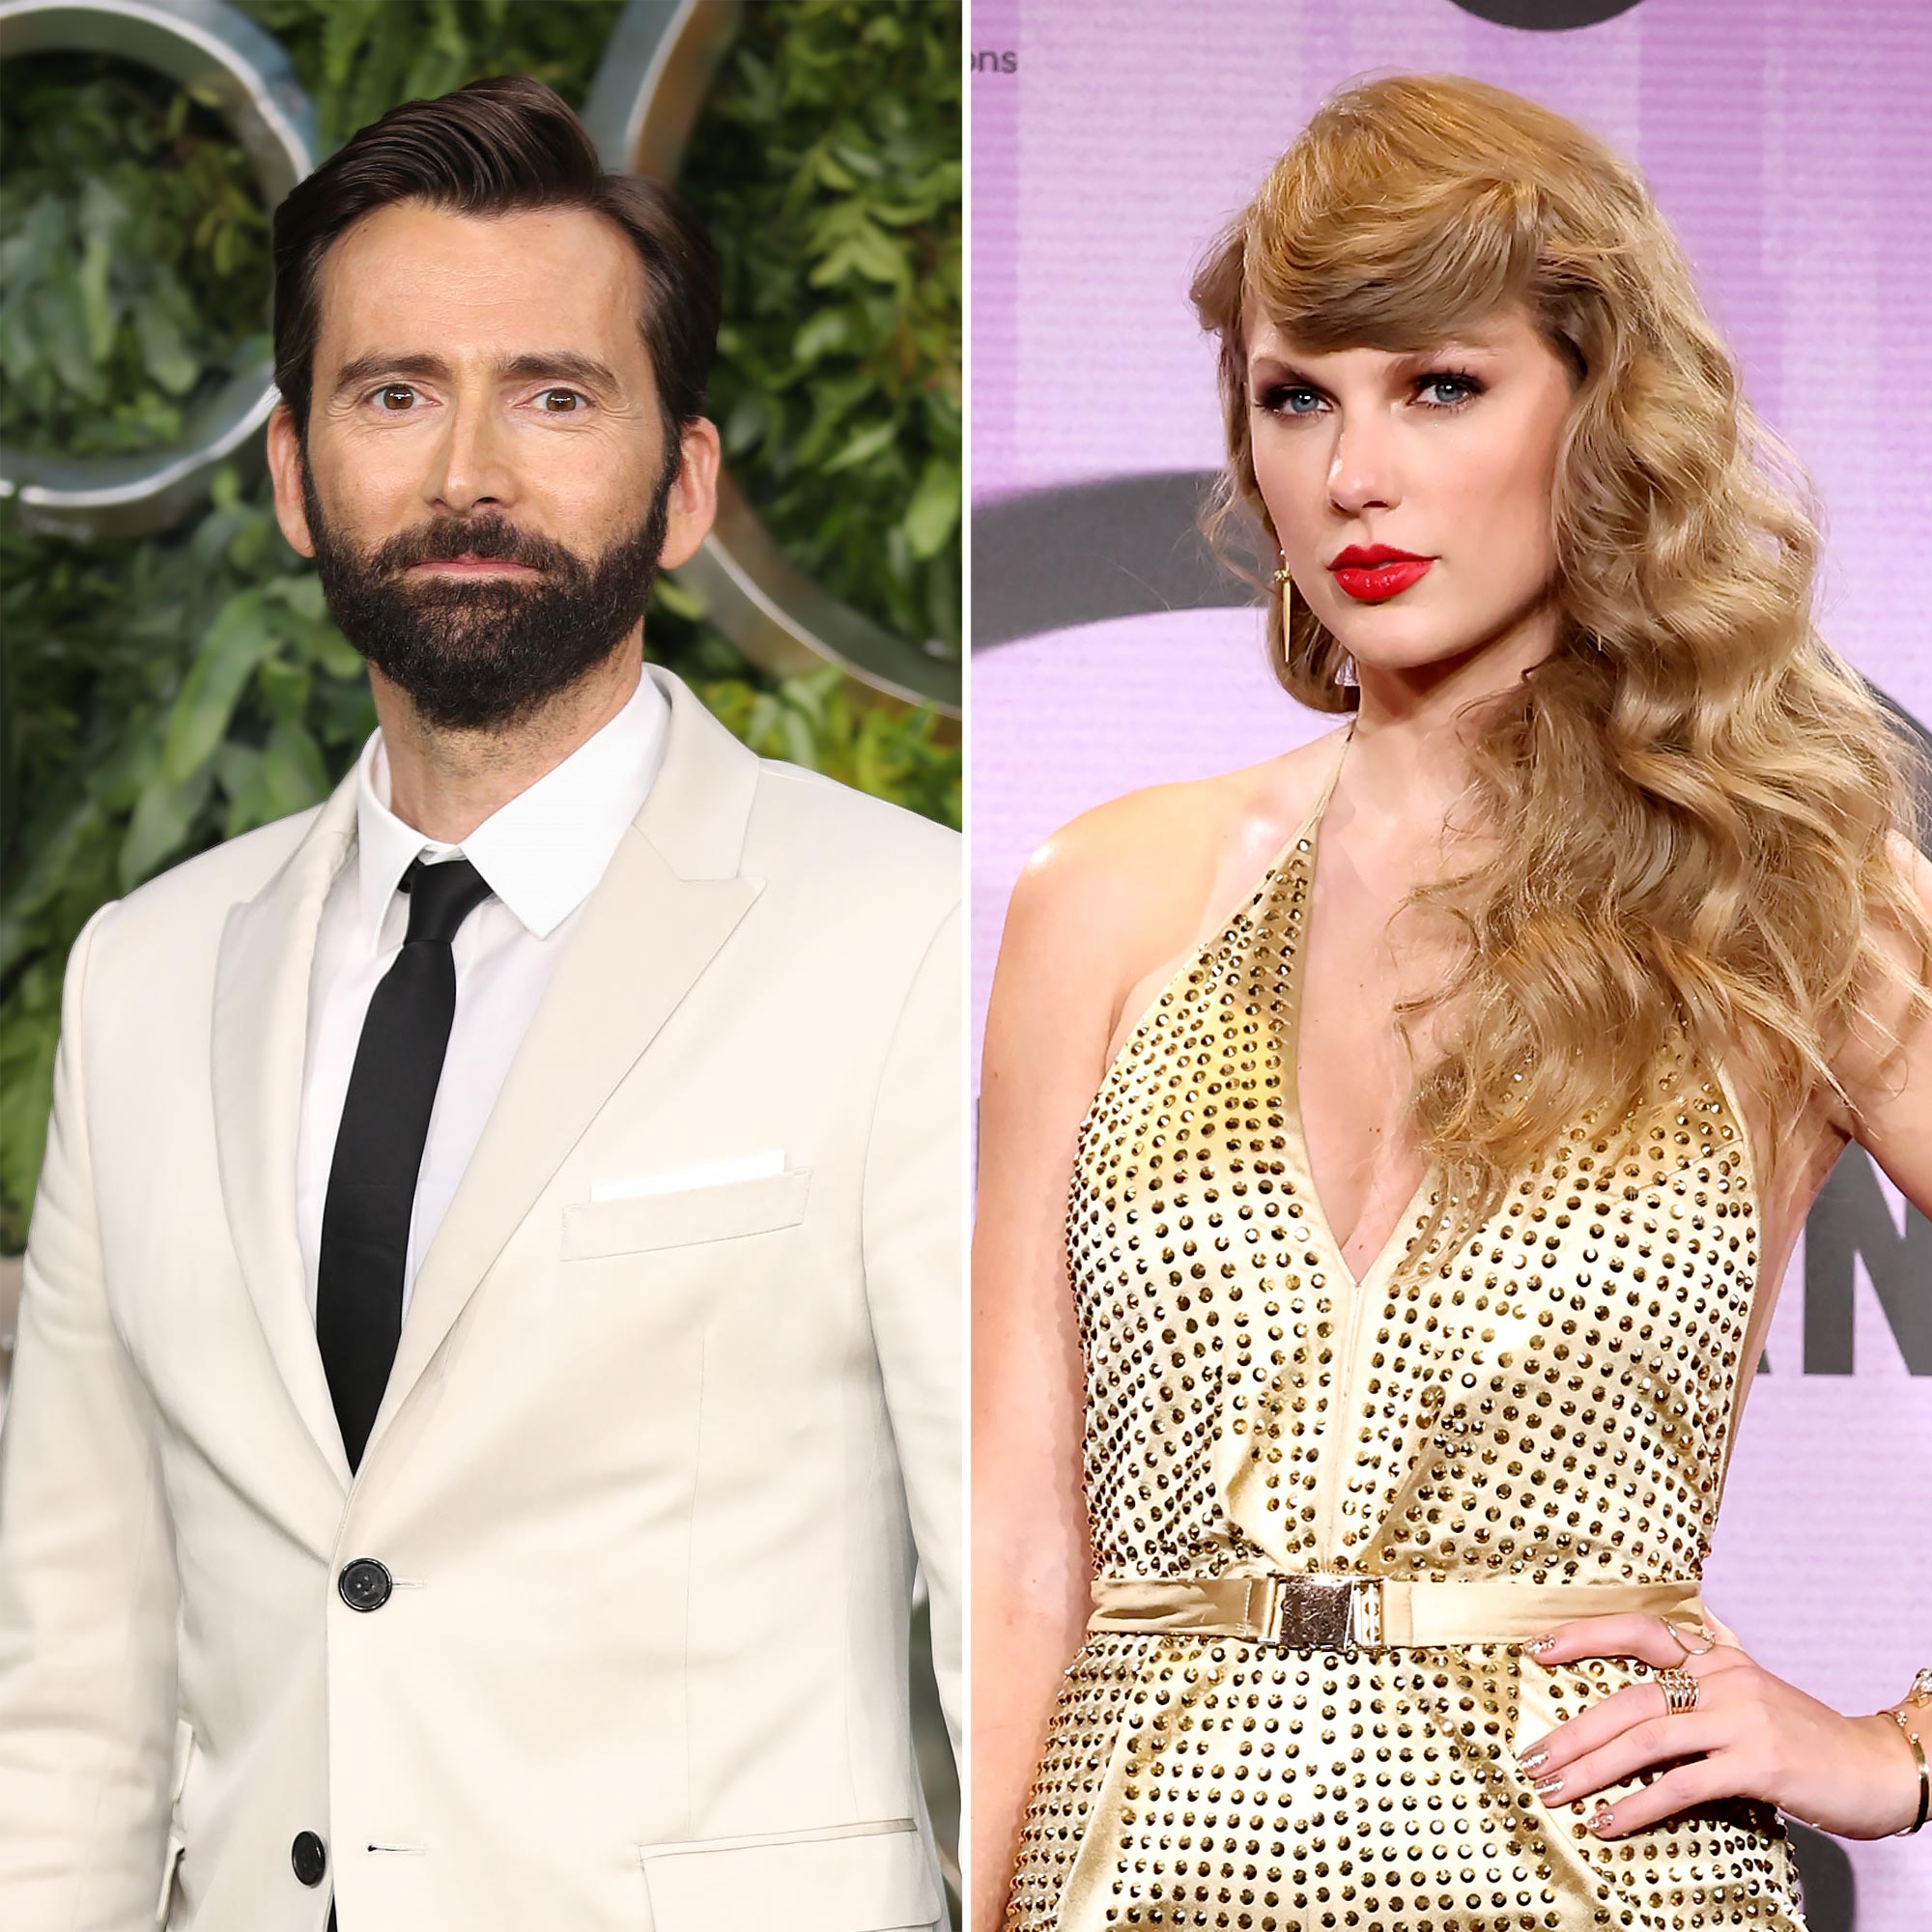 BAFTAs Host David Tennant Promises Not to 'Diss' Taylor Swift